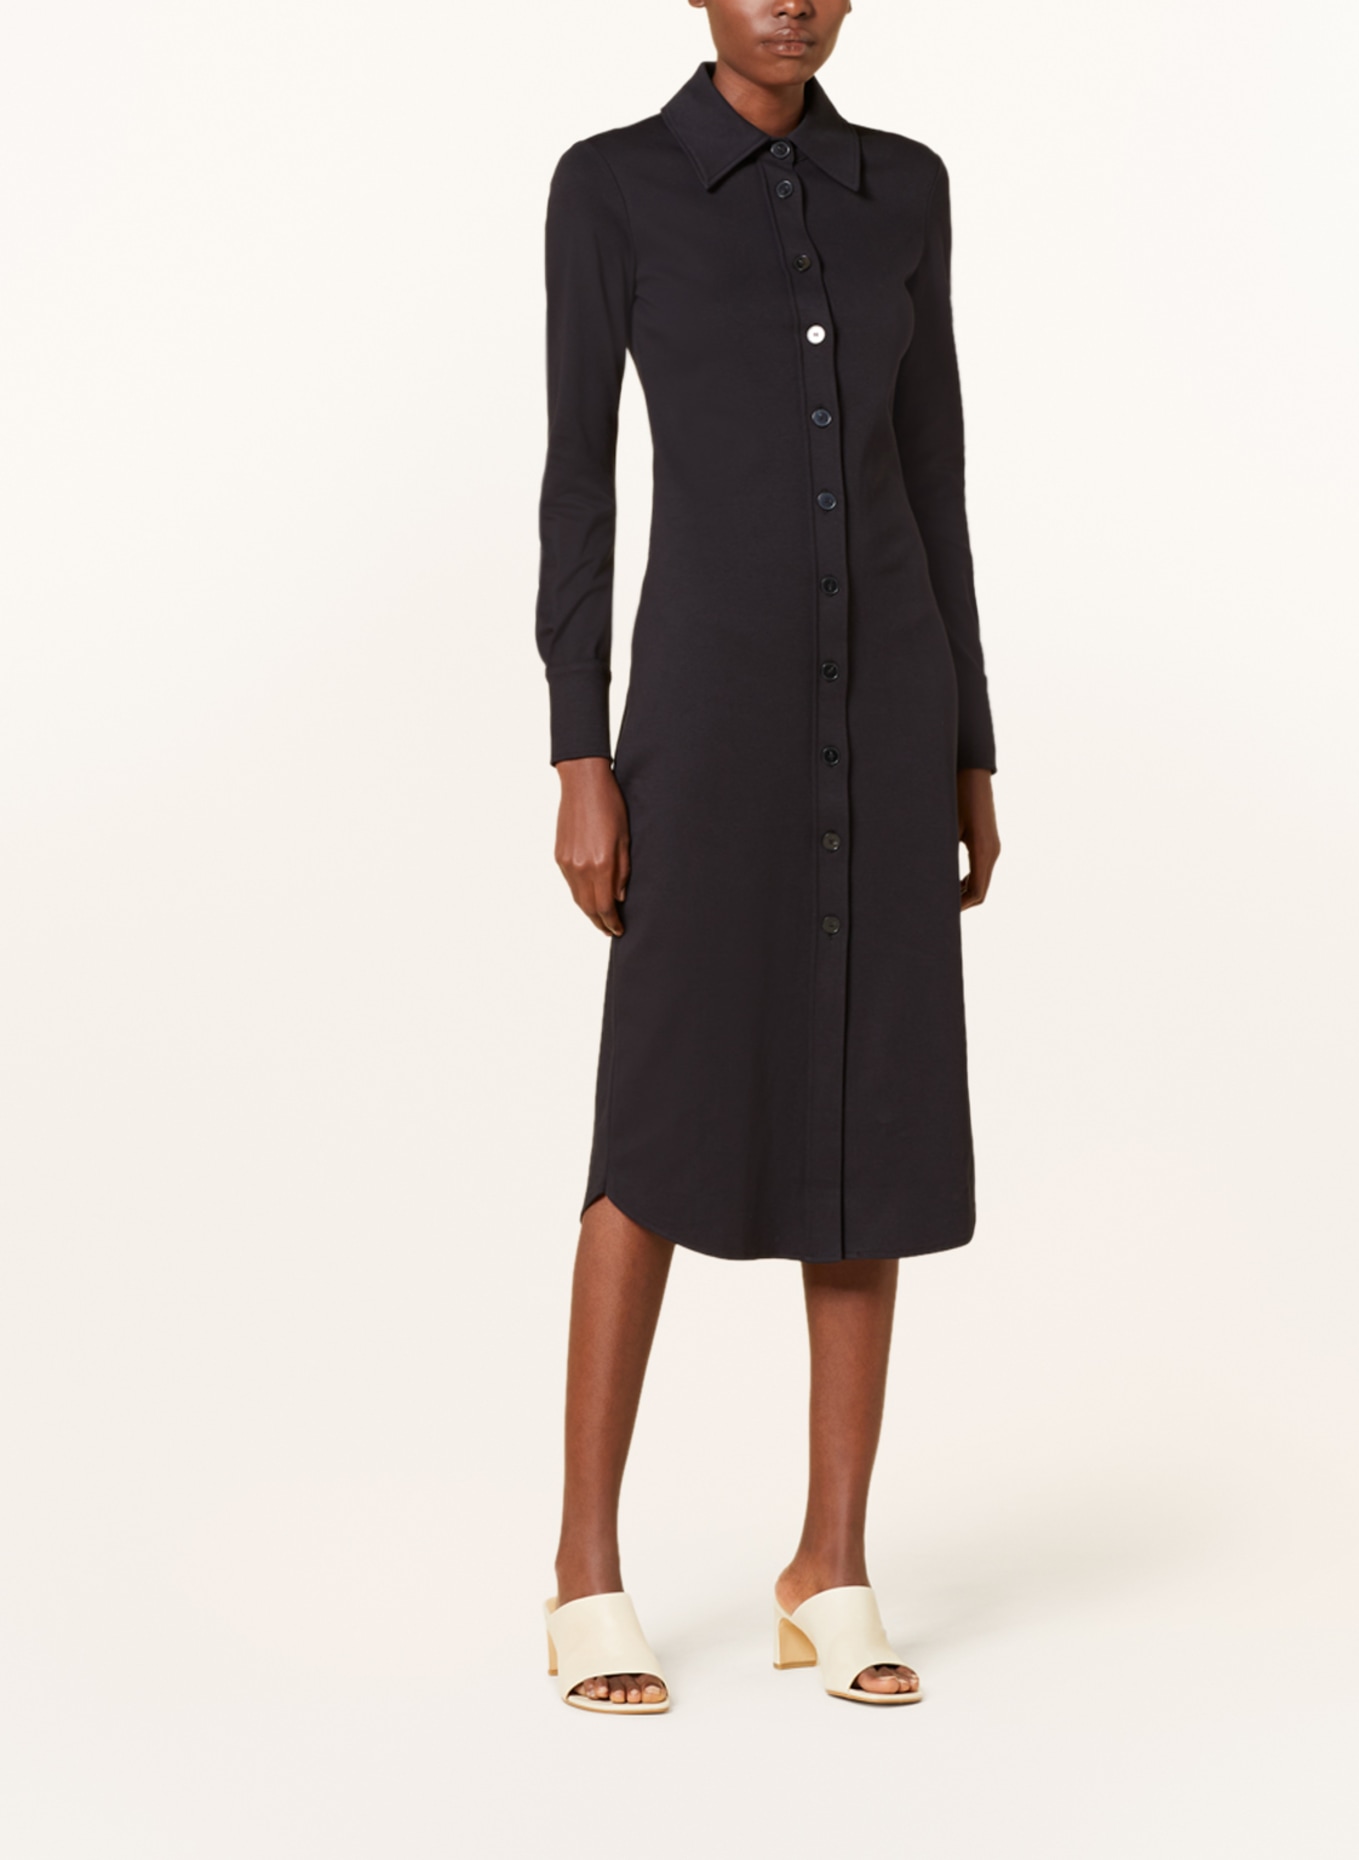 CLOSED Shirt dress made of jersey, Color: BLACK (Image 2)